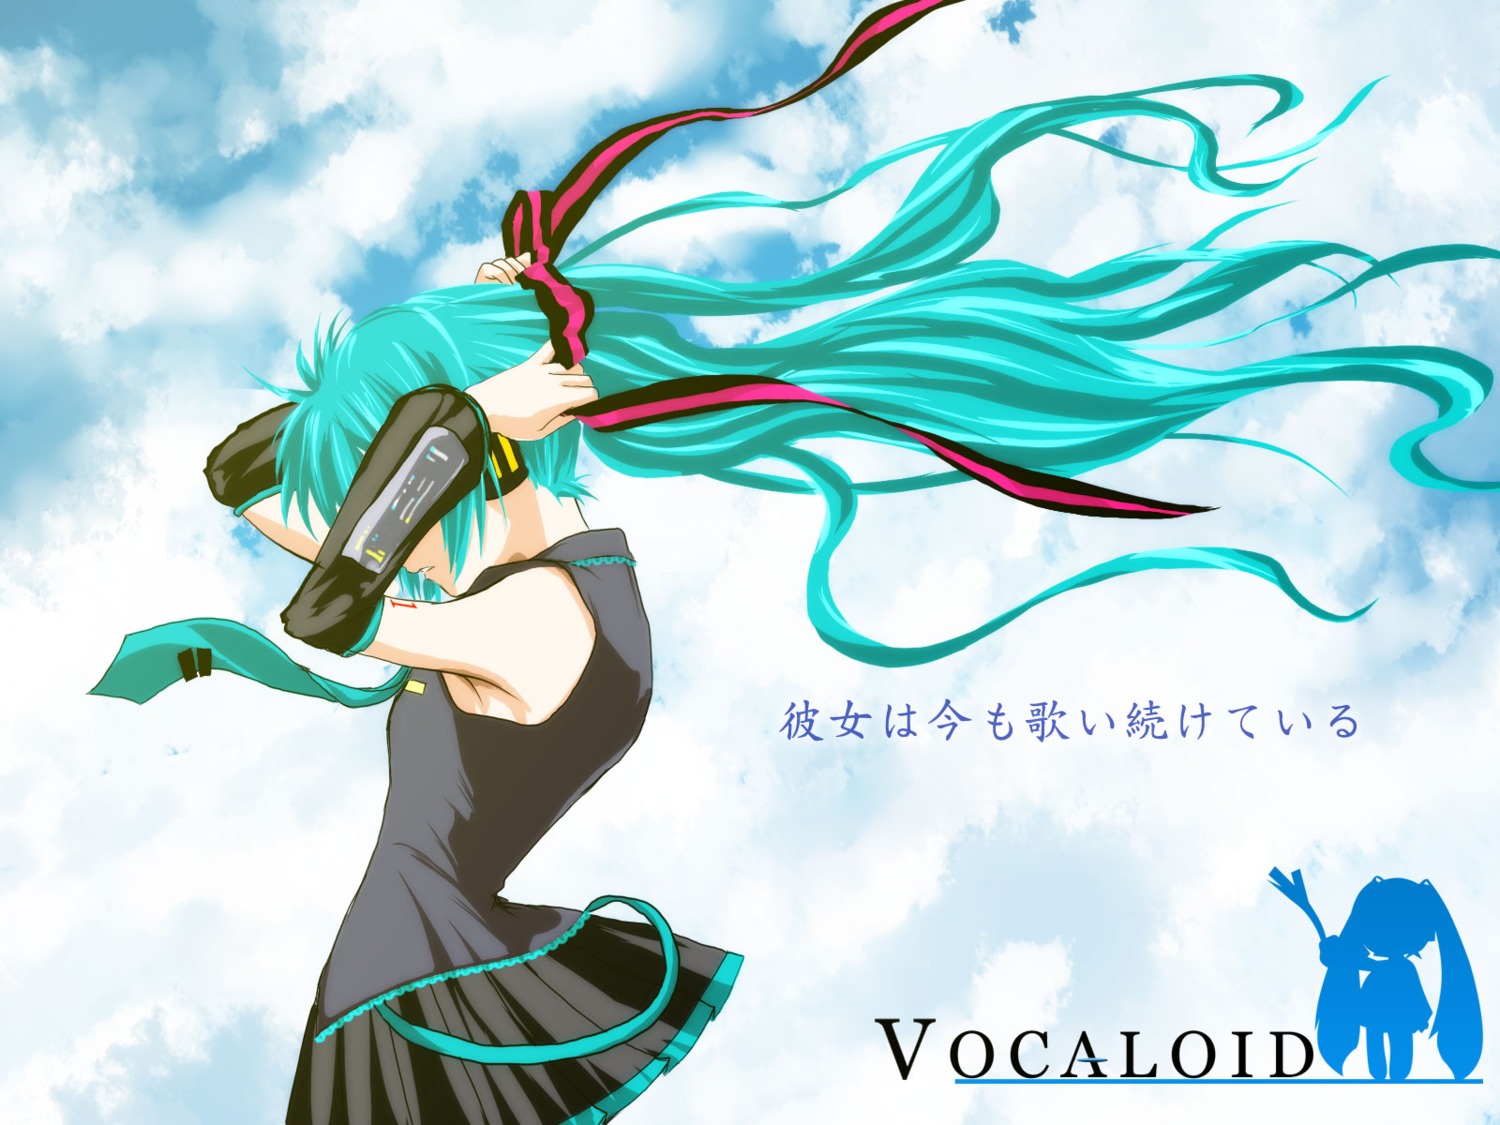 put mid in vocaloid editor